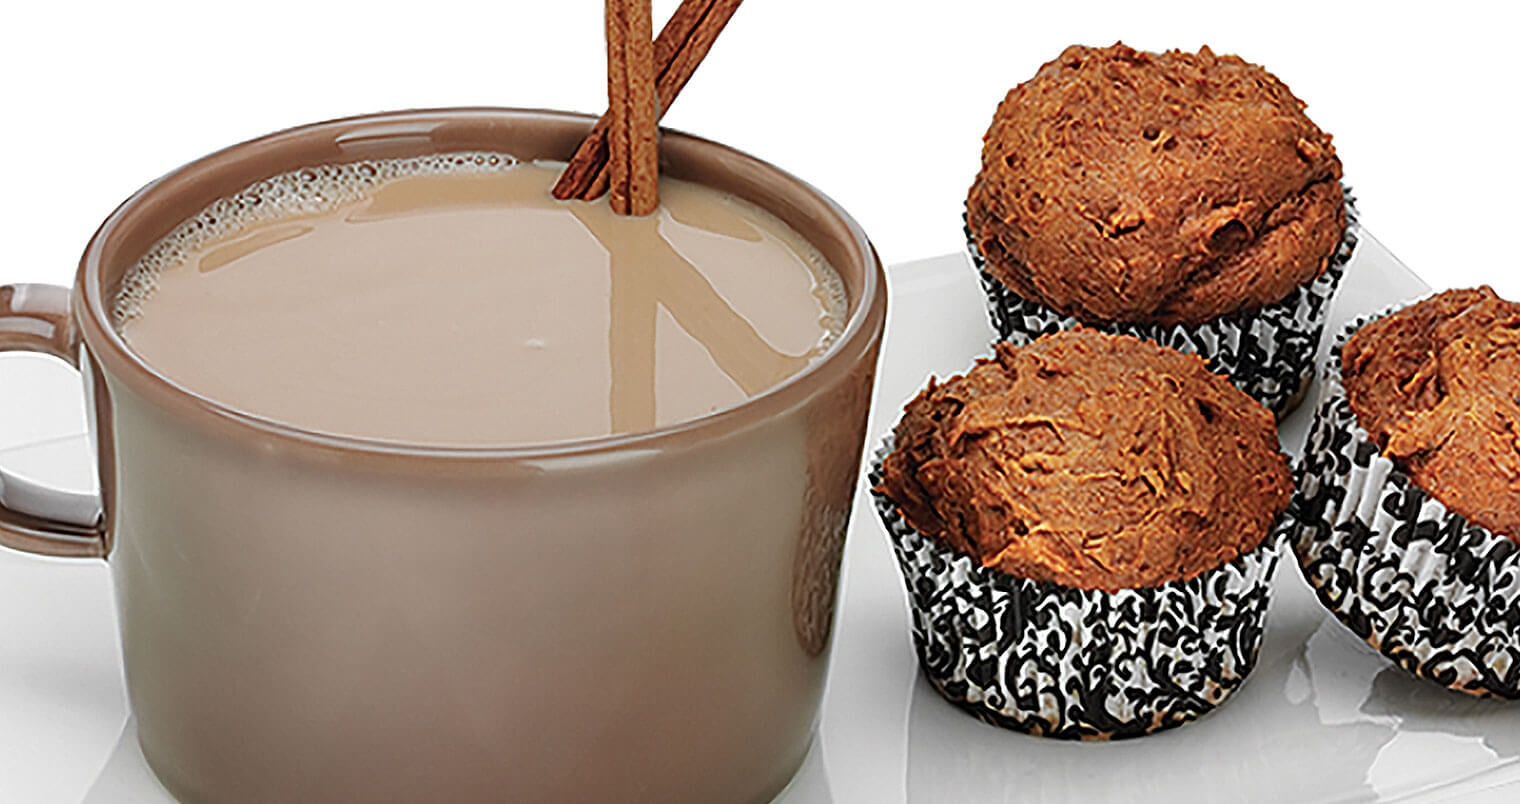 RumChata Pumpkin Spice Muffins, with hot cocoa, cinnamin sticks, featured image